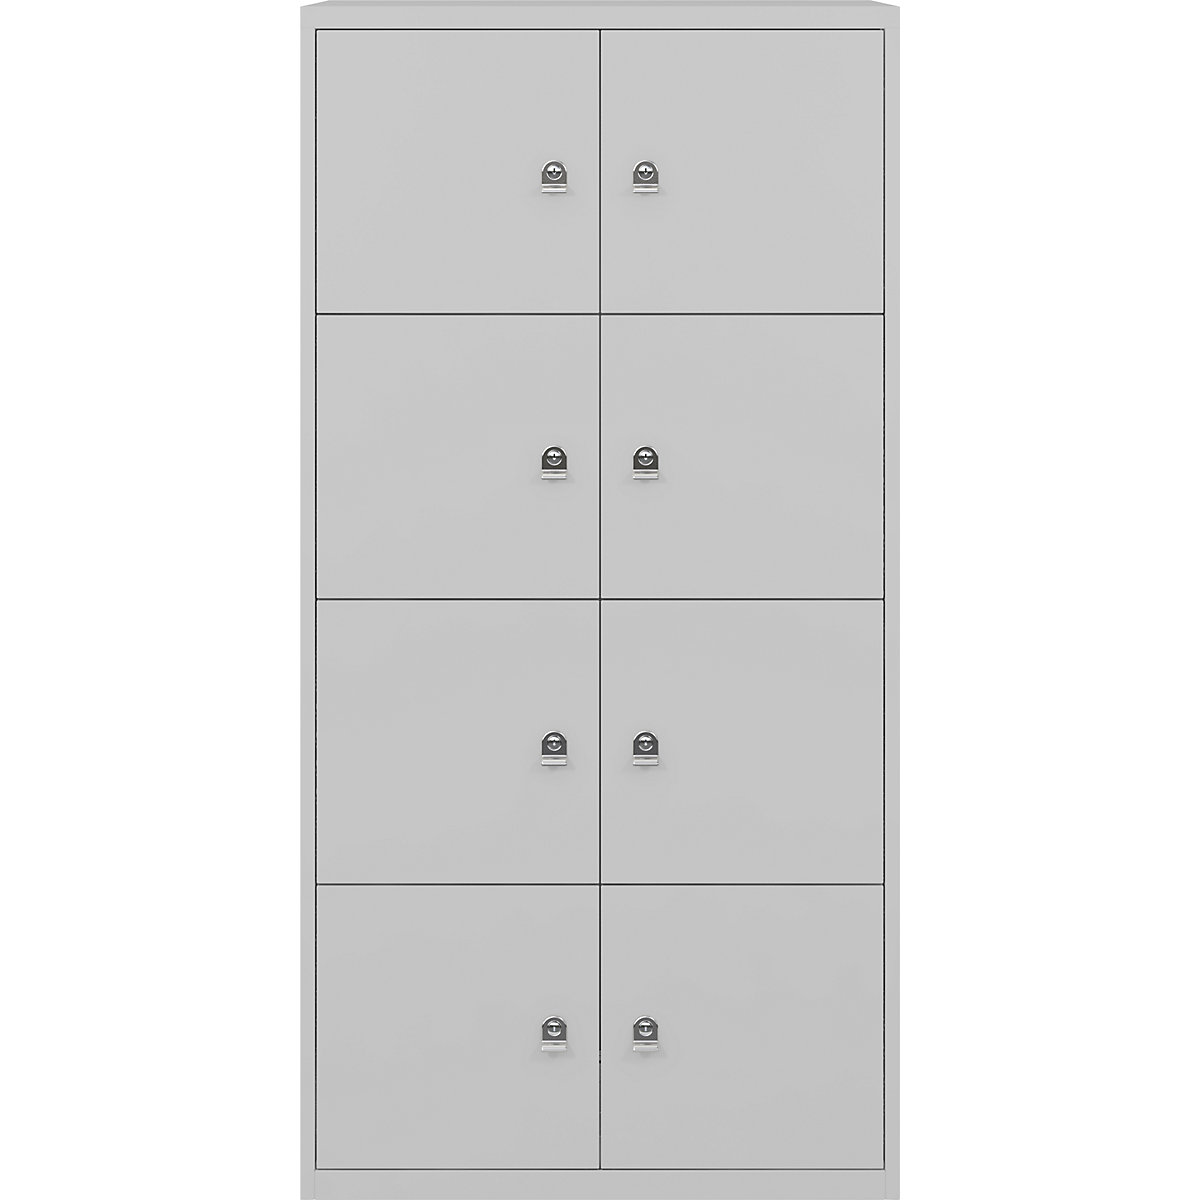 BISLEY – LateralFile™ lodge, with 8 lockable compartments, height 375 mm each, goose grey